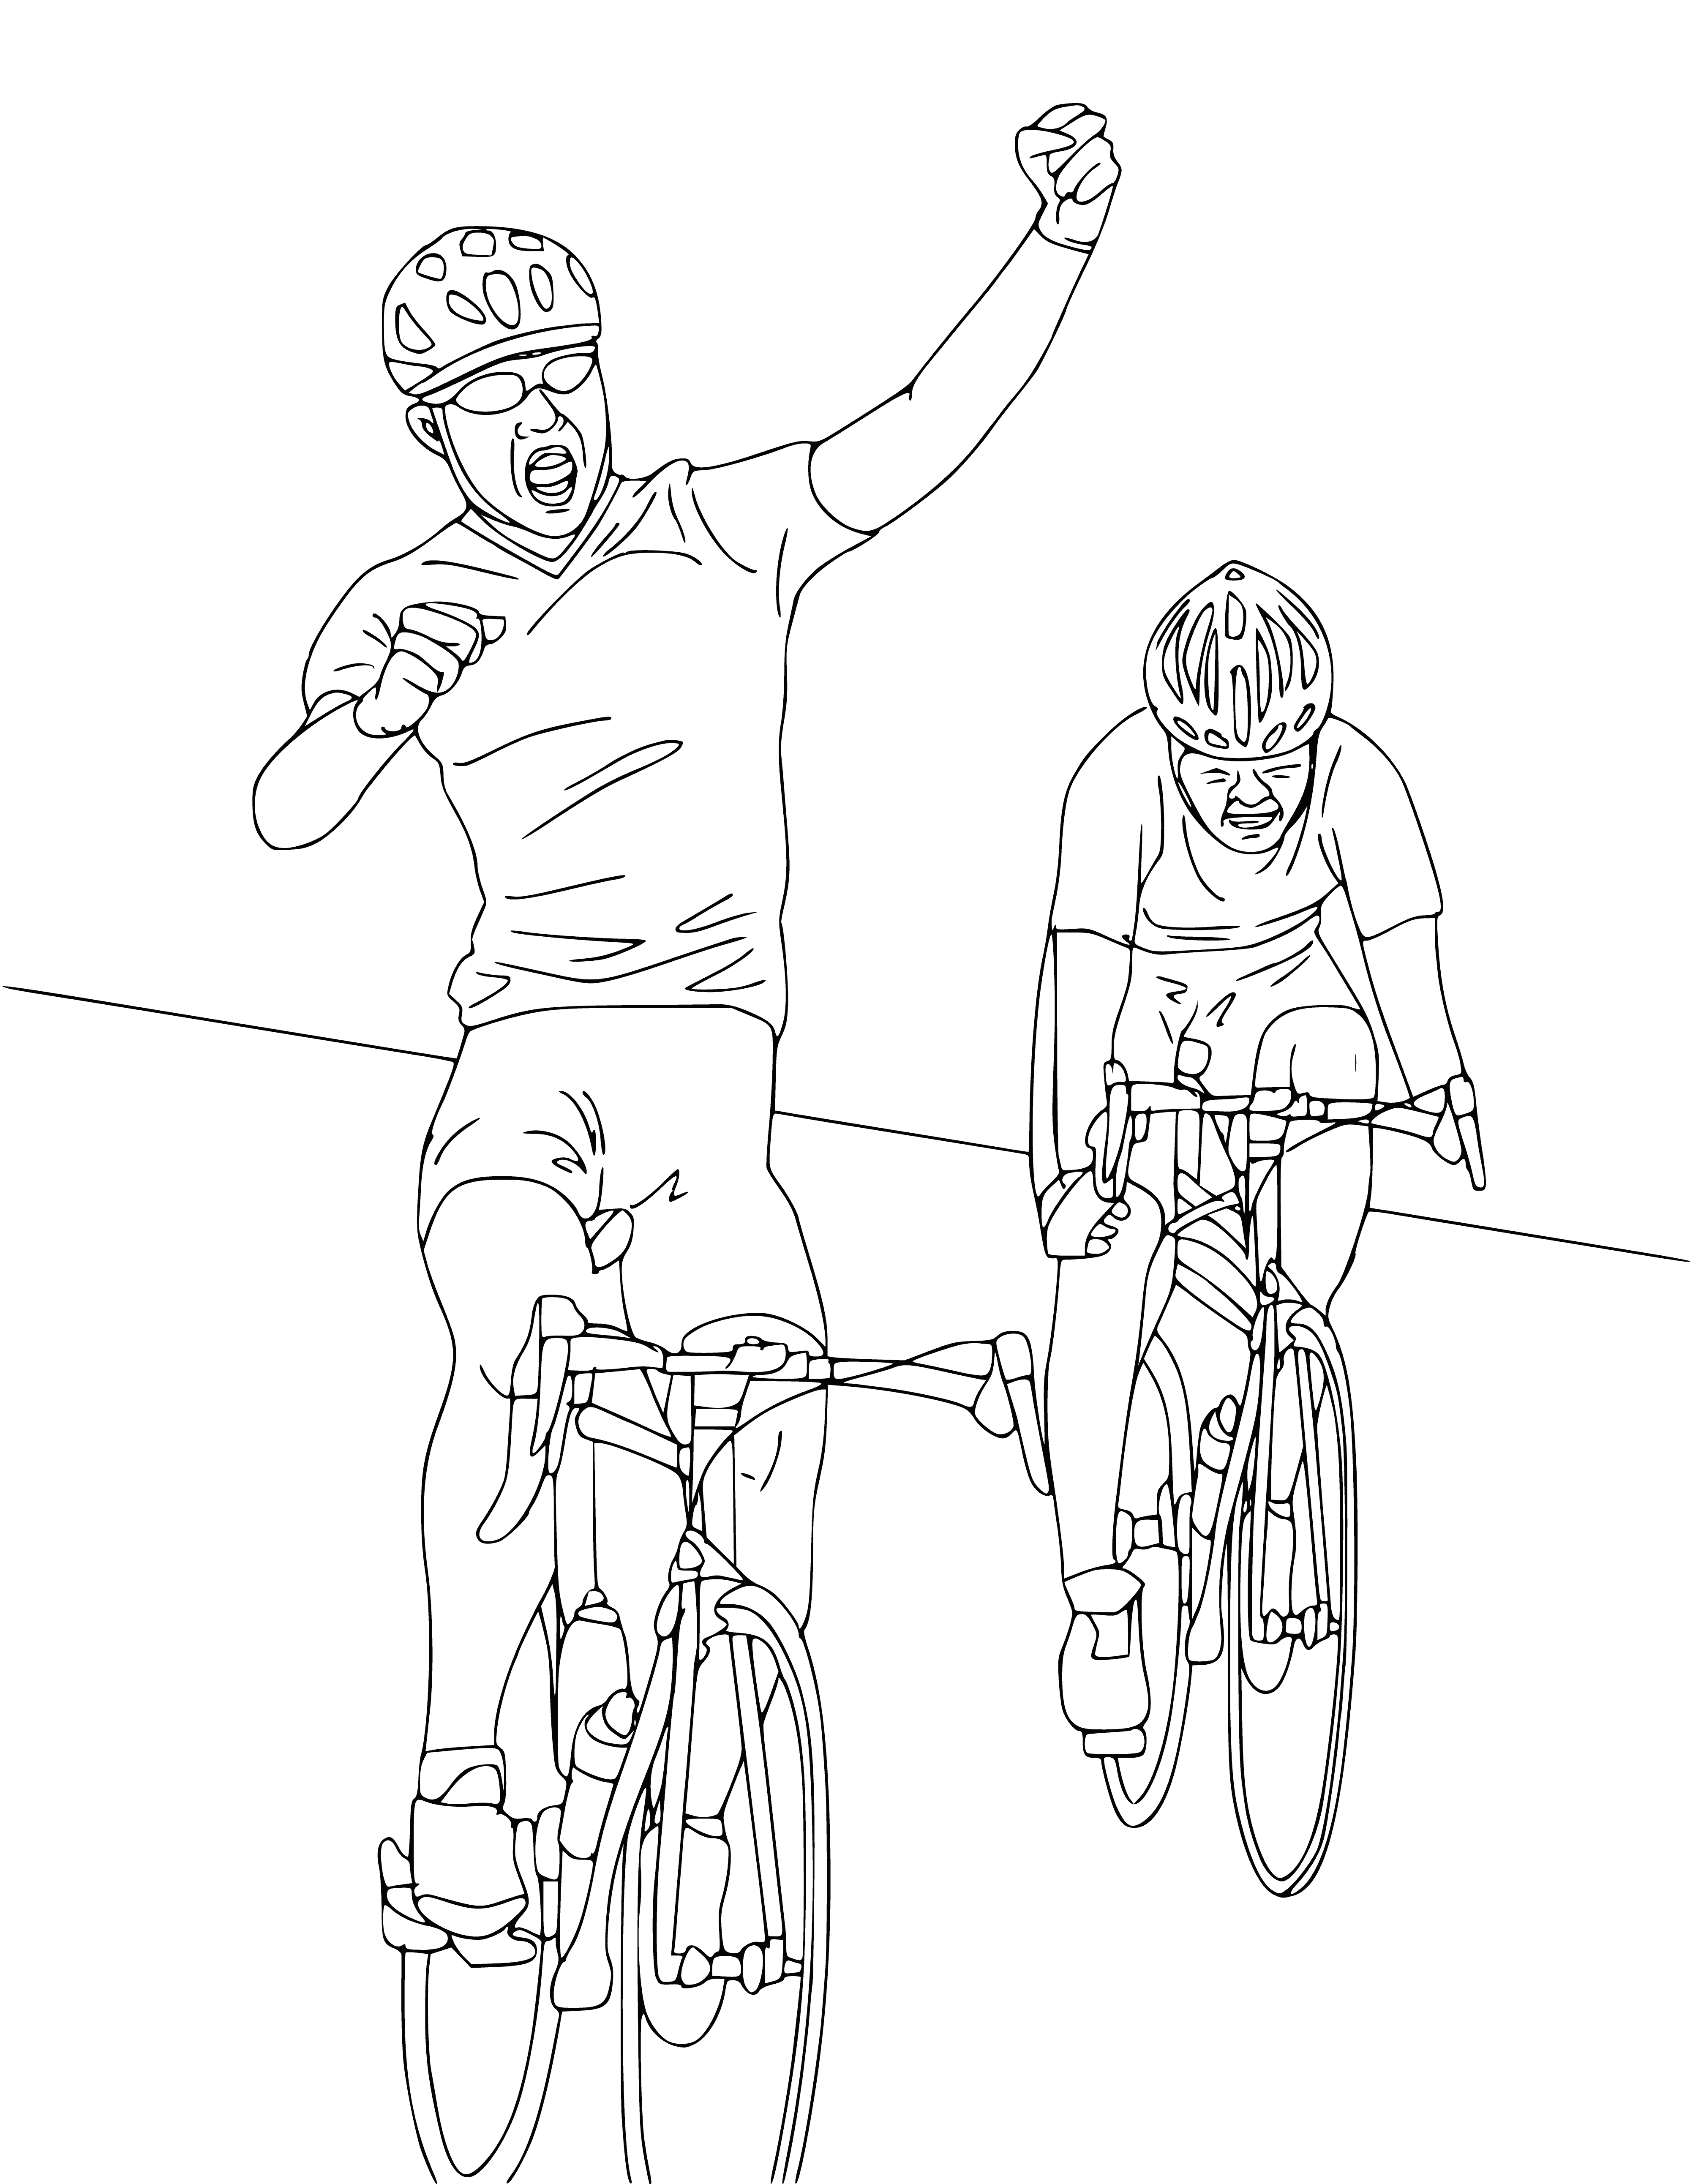 Bike race coloring page